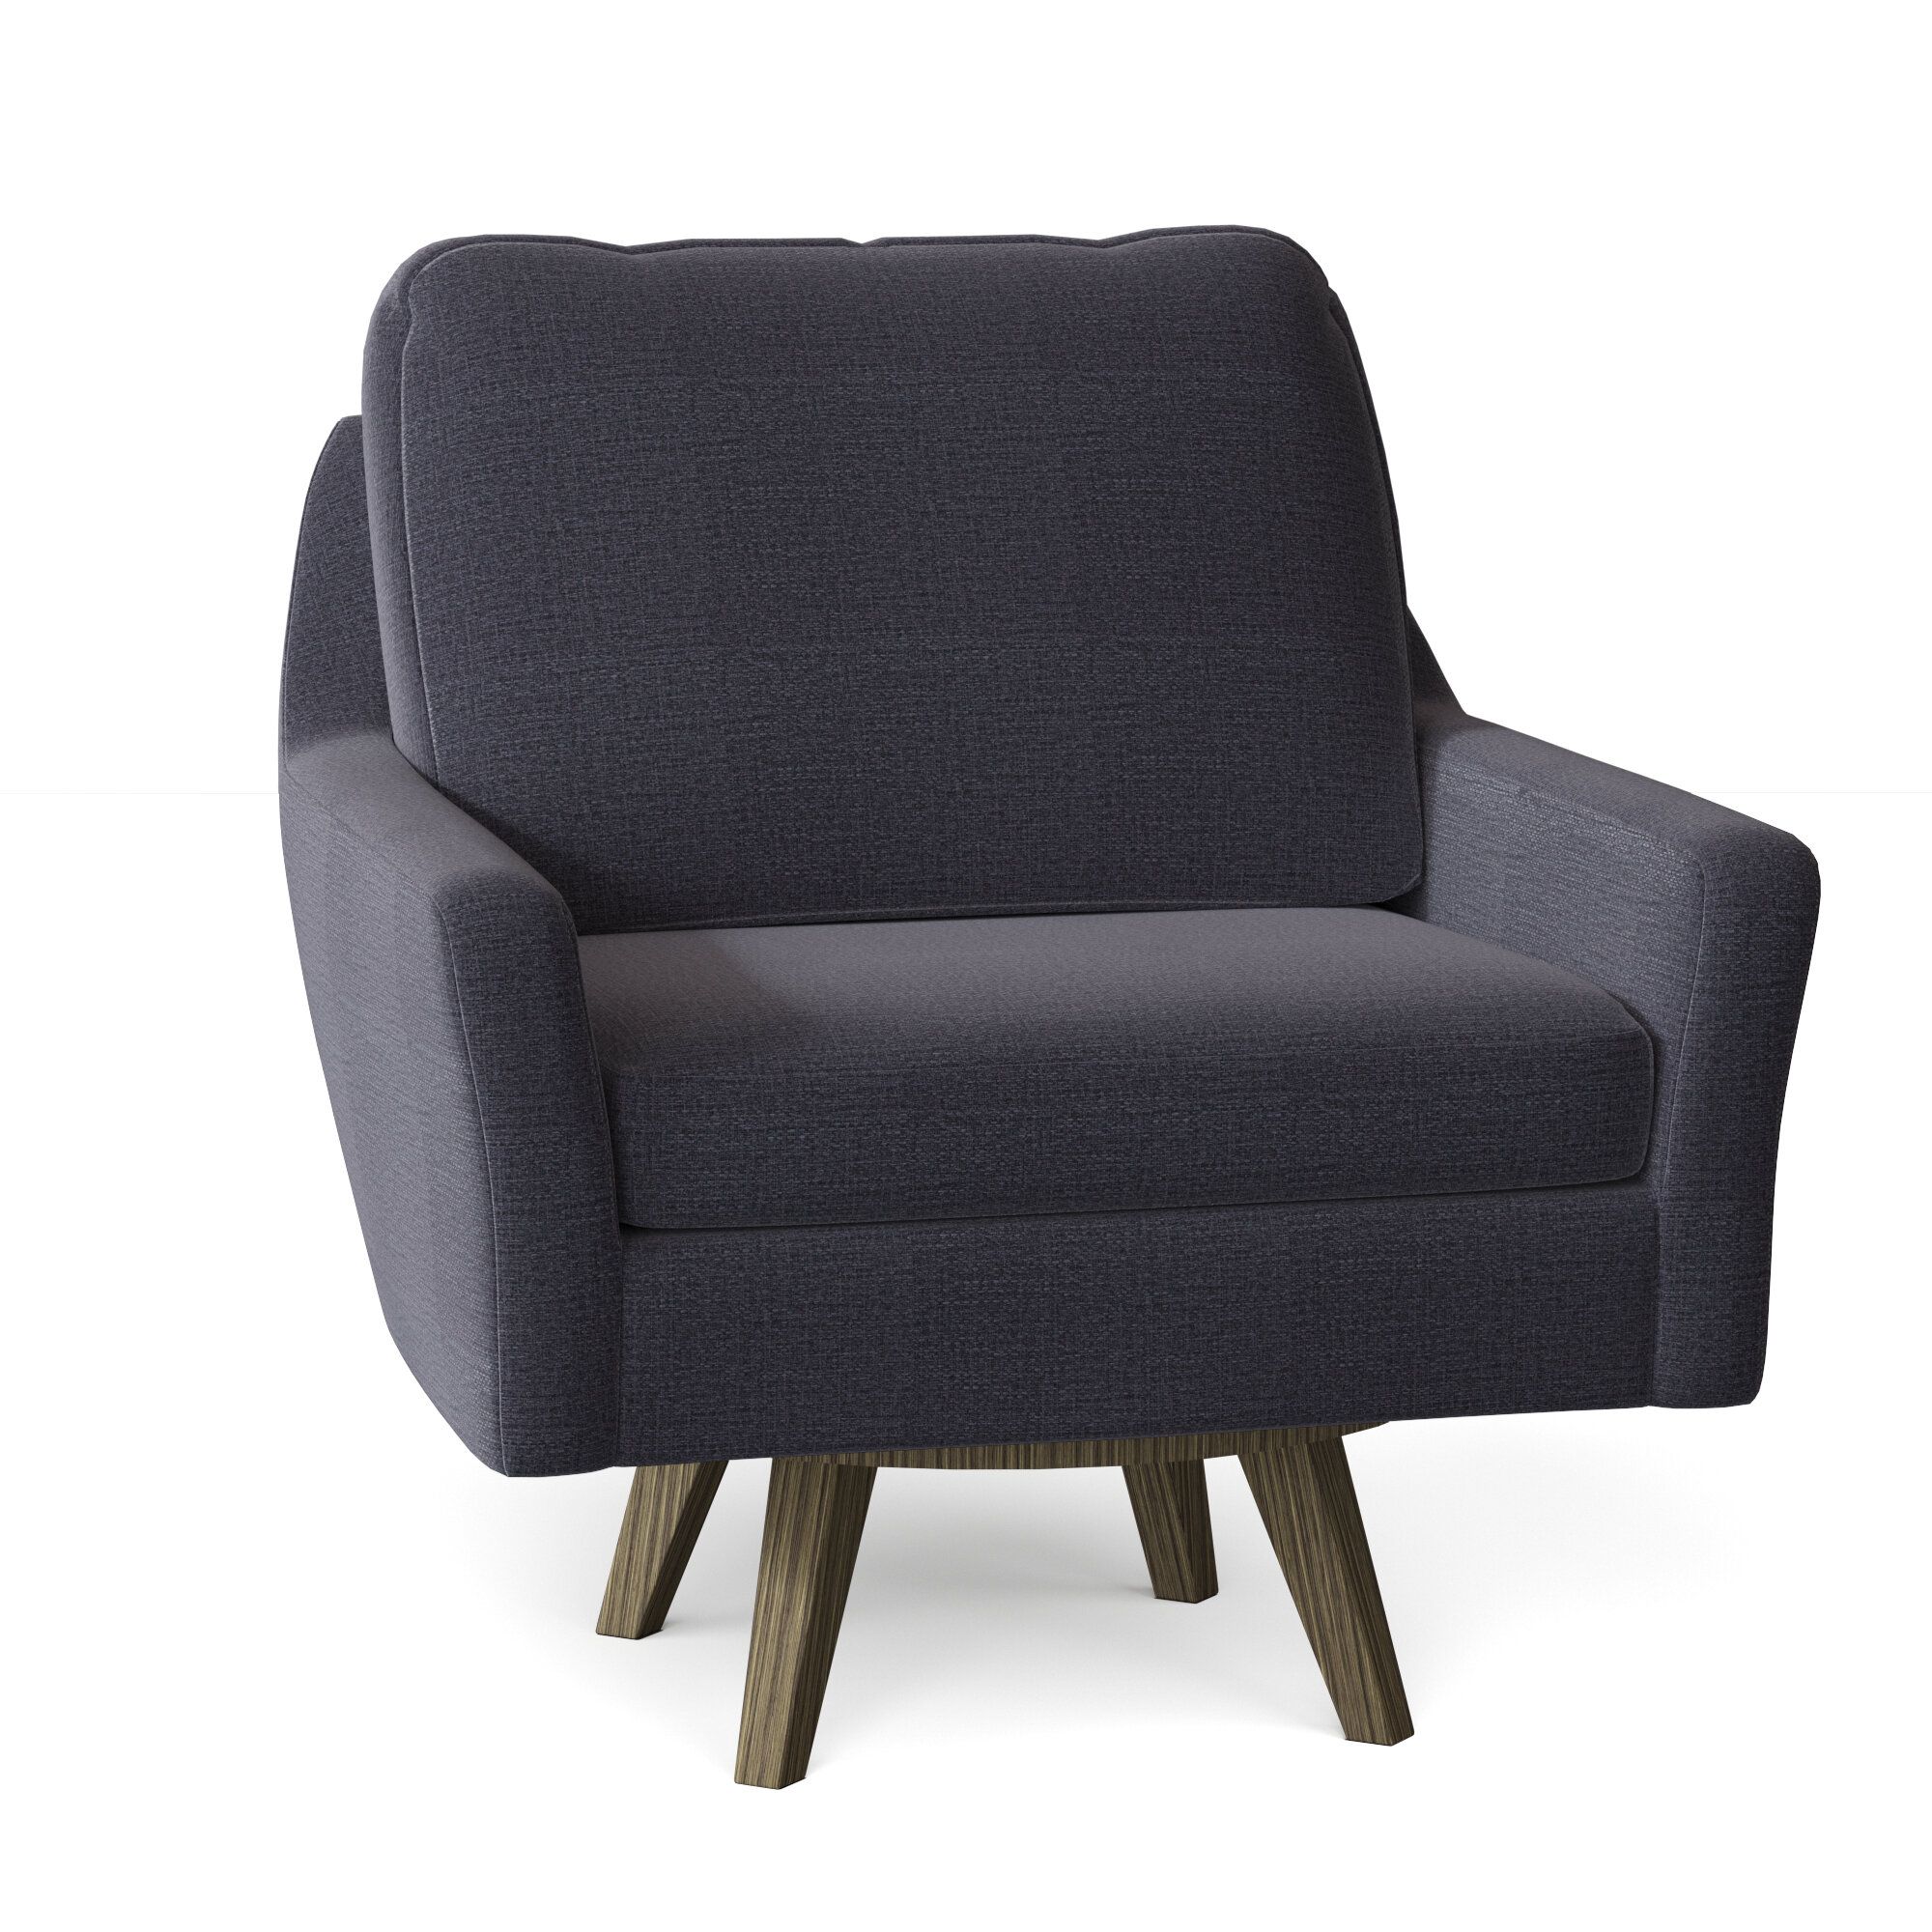 Navy Swivel Accent Chairs You'Ll Love In 2021 | Wayfair Pertaining To Loftus Swivel Armchairs (View 14 of 15)